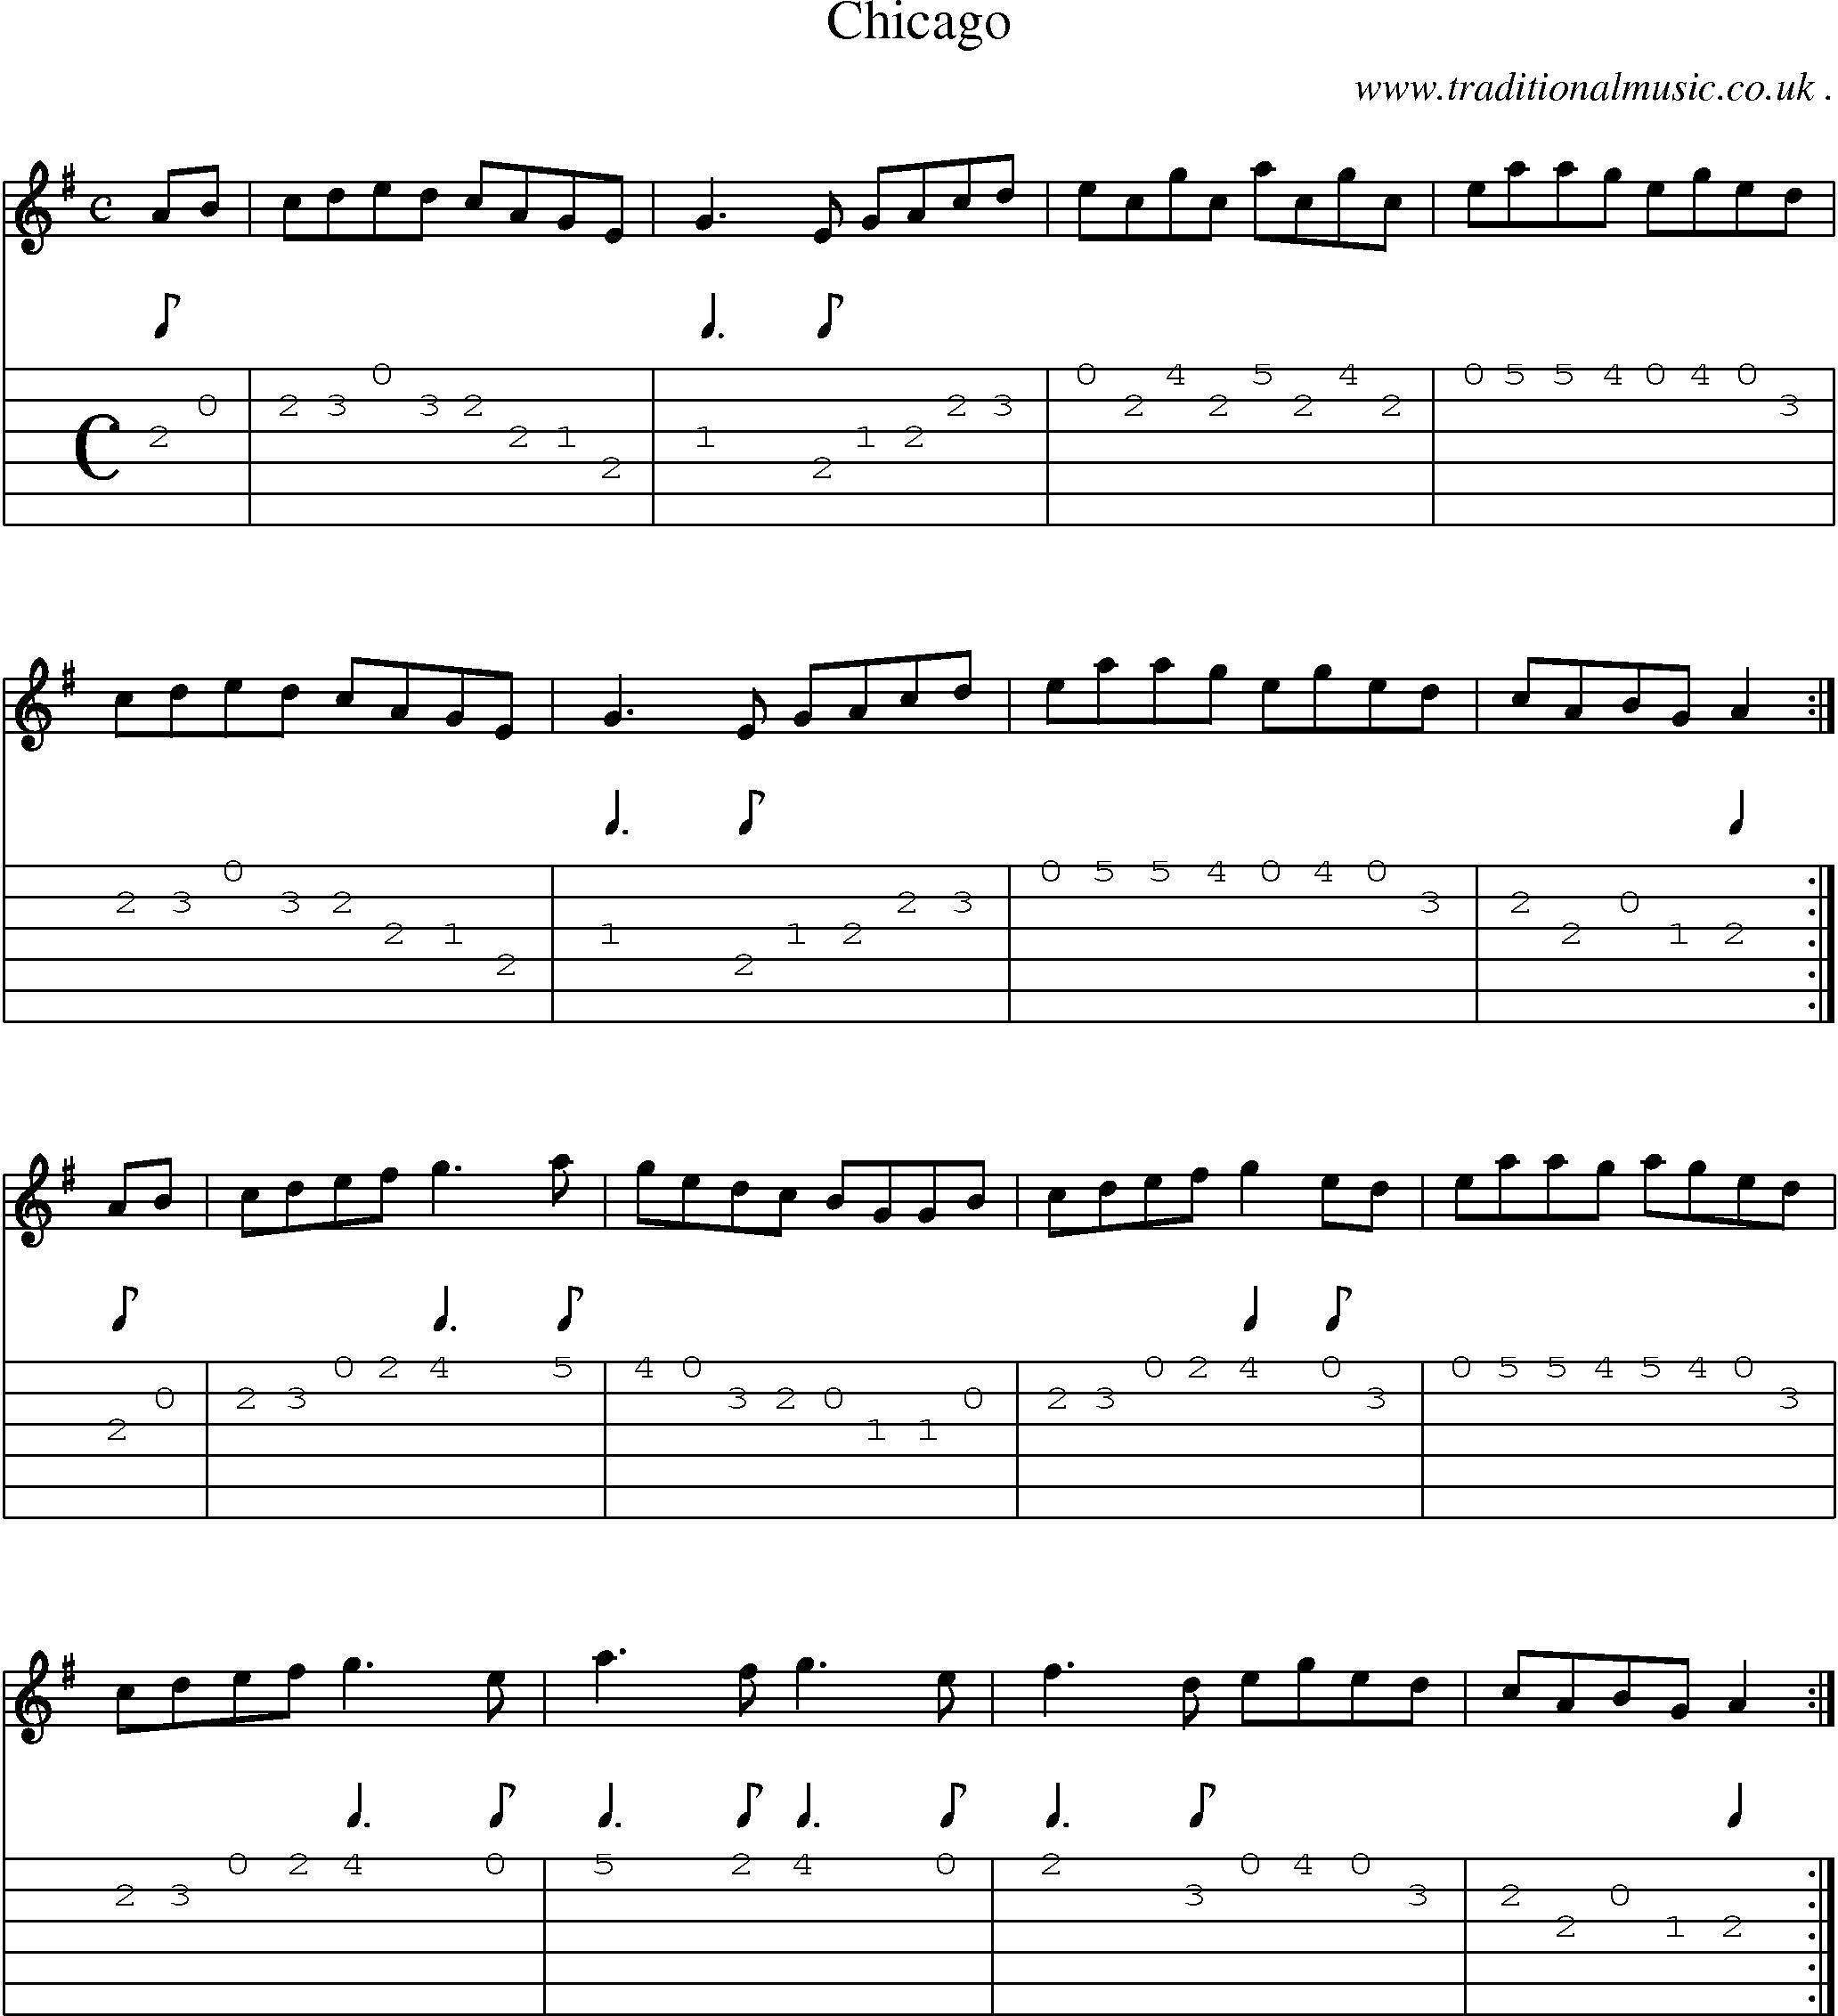 Sheet-Music and Guitar Tabs for Chicago